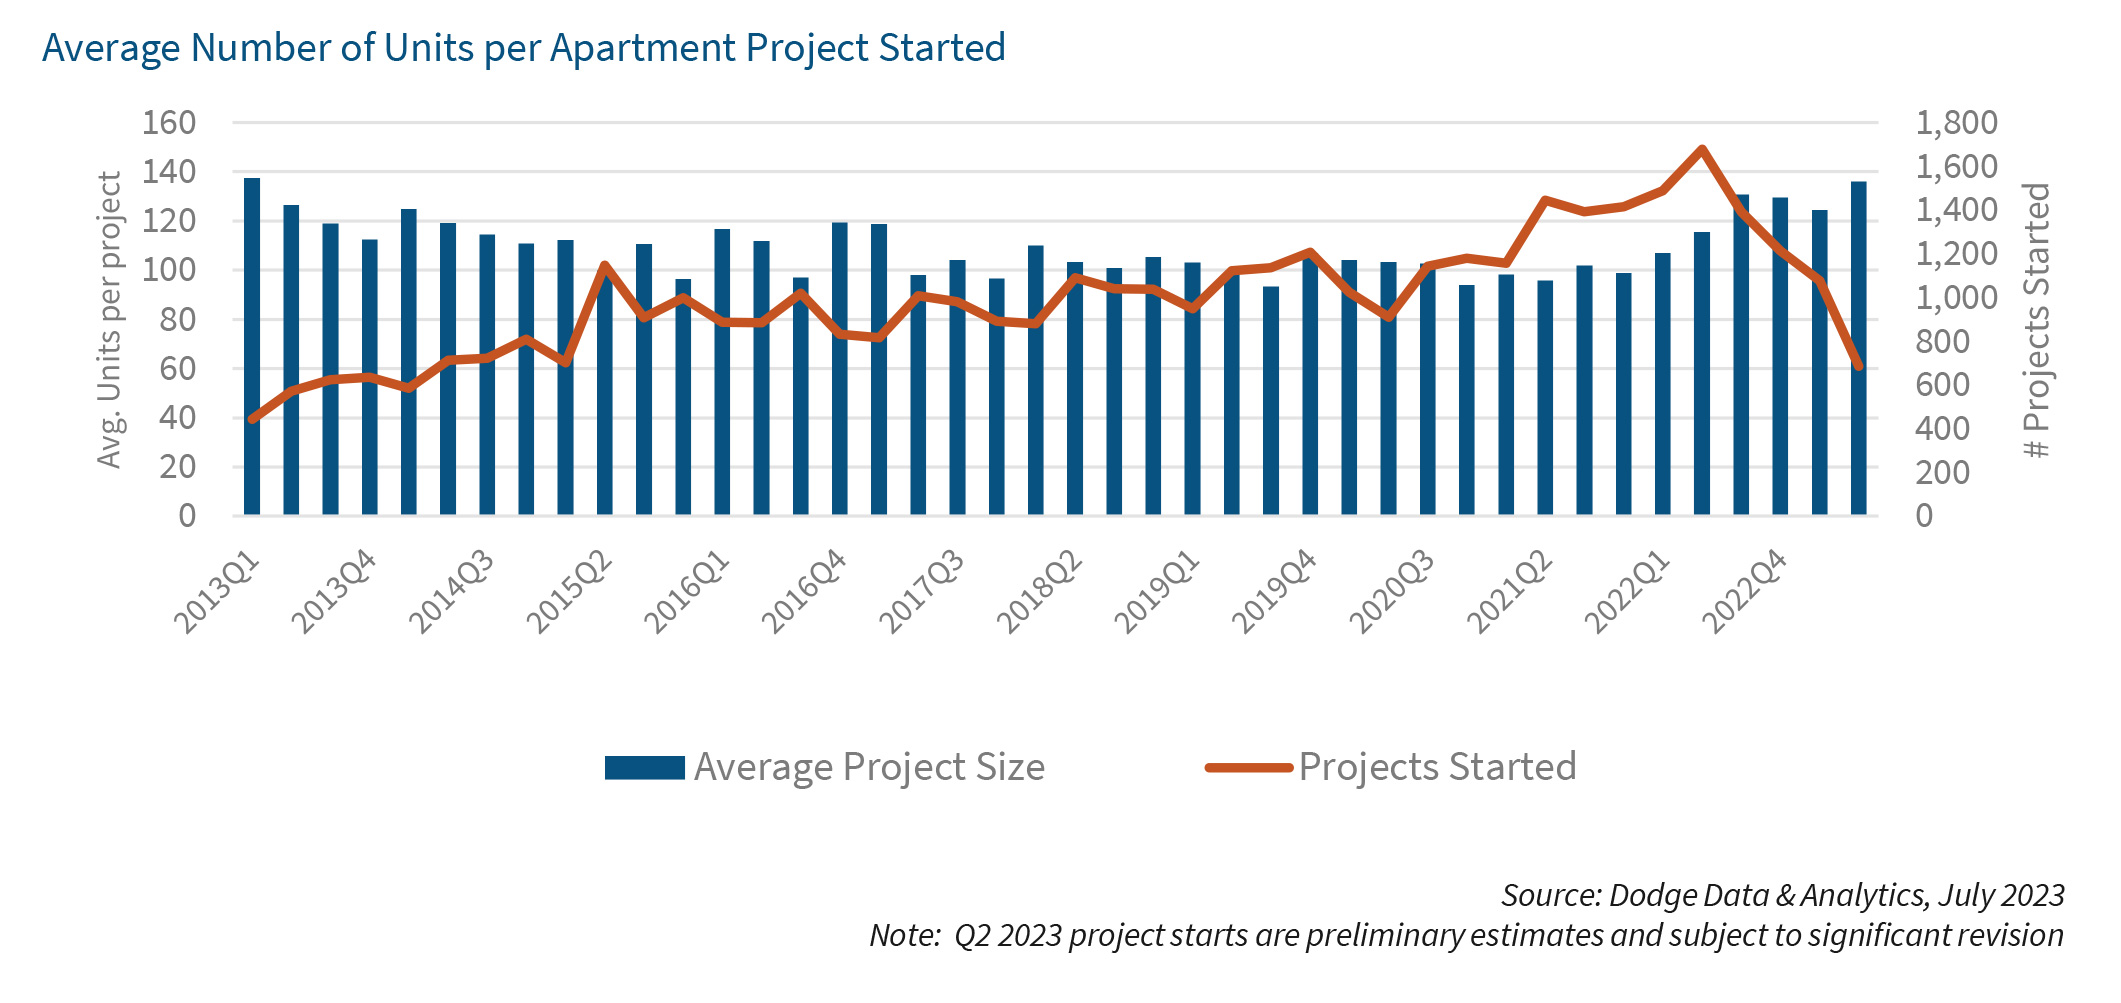 Average Number of Units per Apartment Project Started